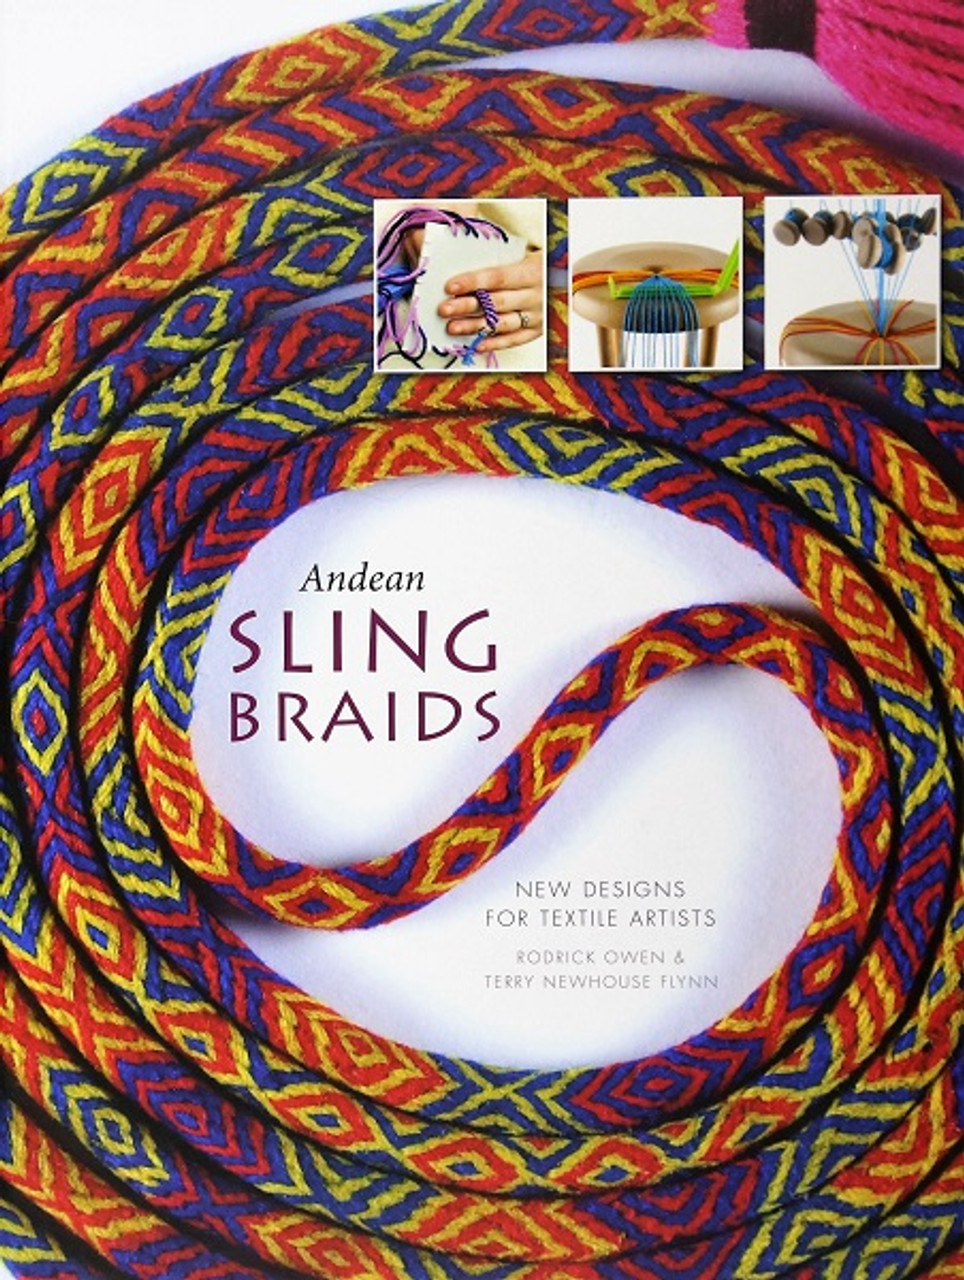 Andean Sling Braids: New Designs for Textile Artists by Rodrick Owen and  Terry Newhouse Flynn